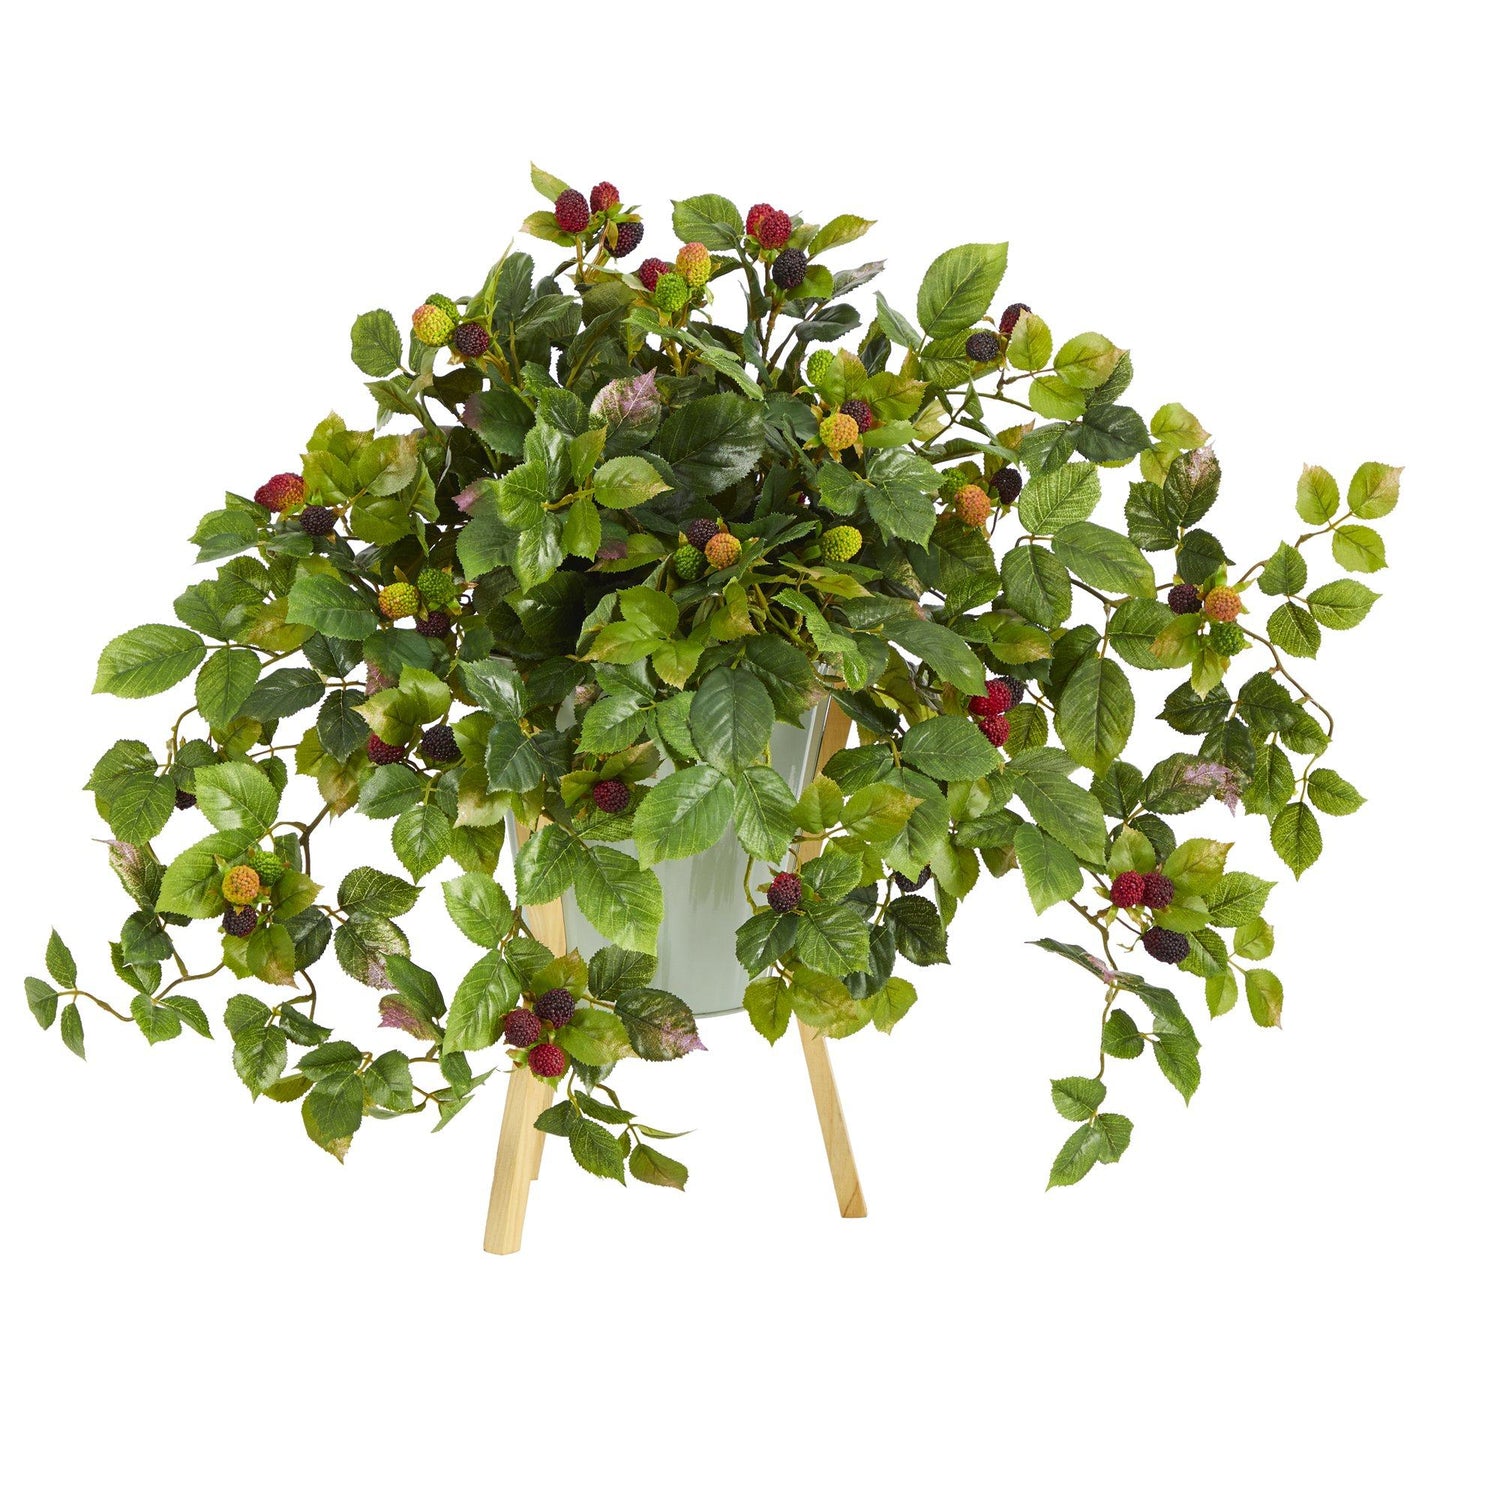 23” Raspberry Artificial Plant in Green Planter with Stand